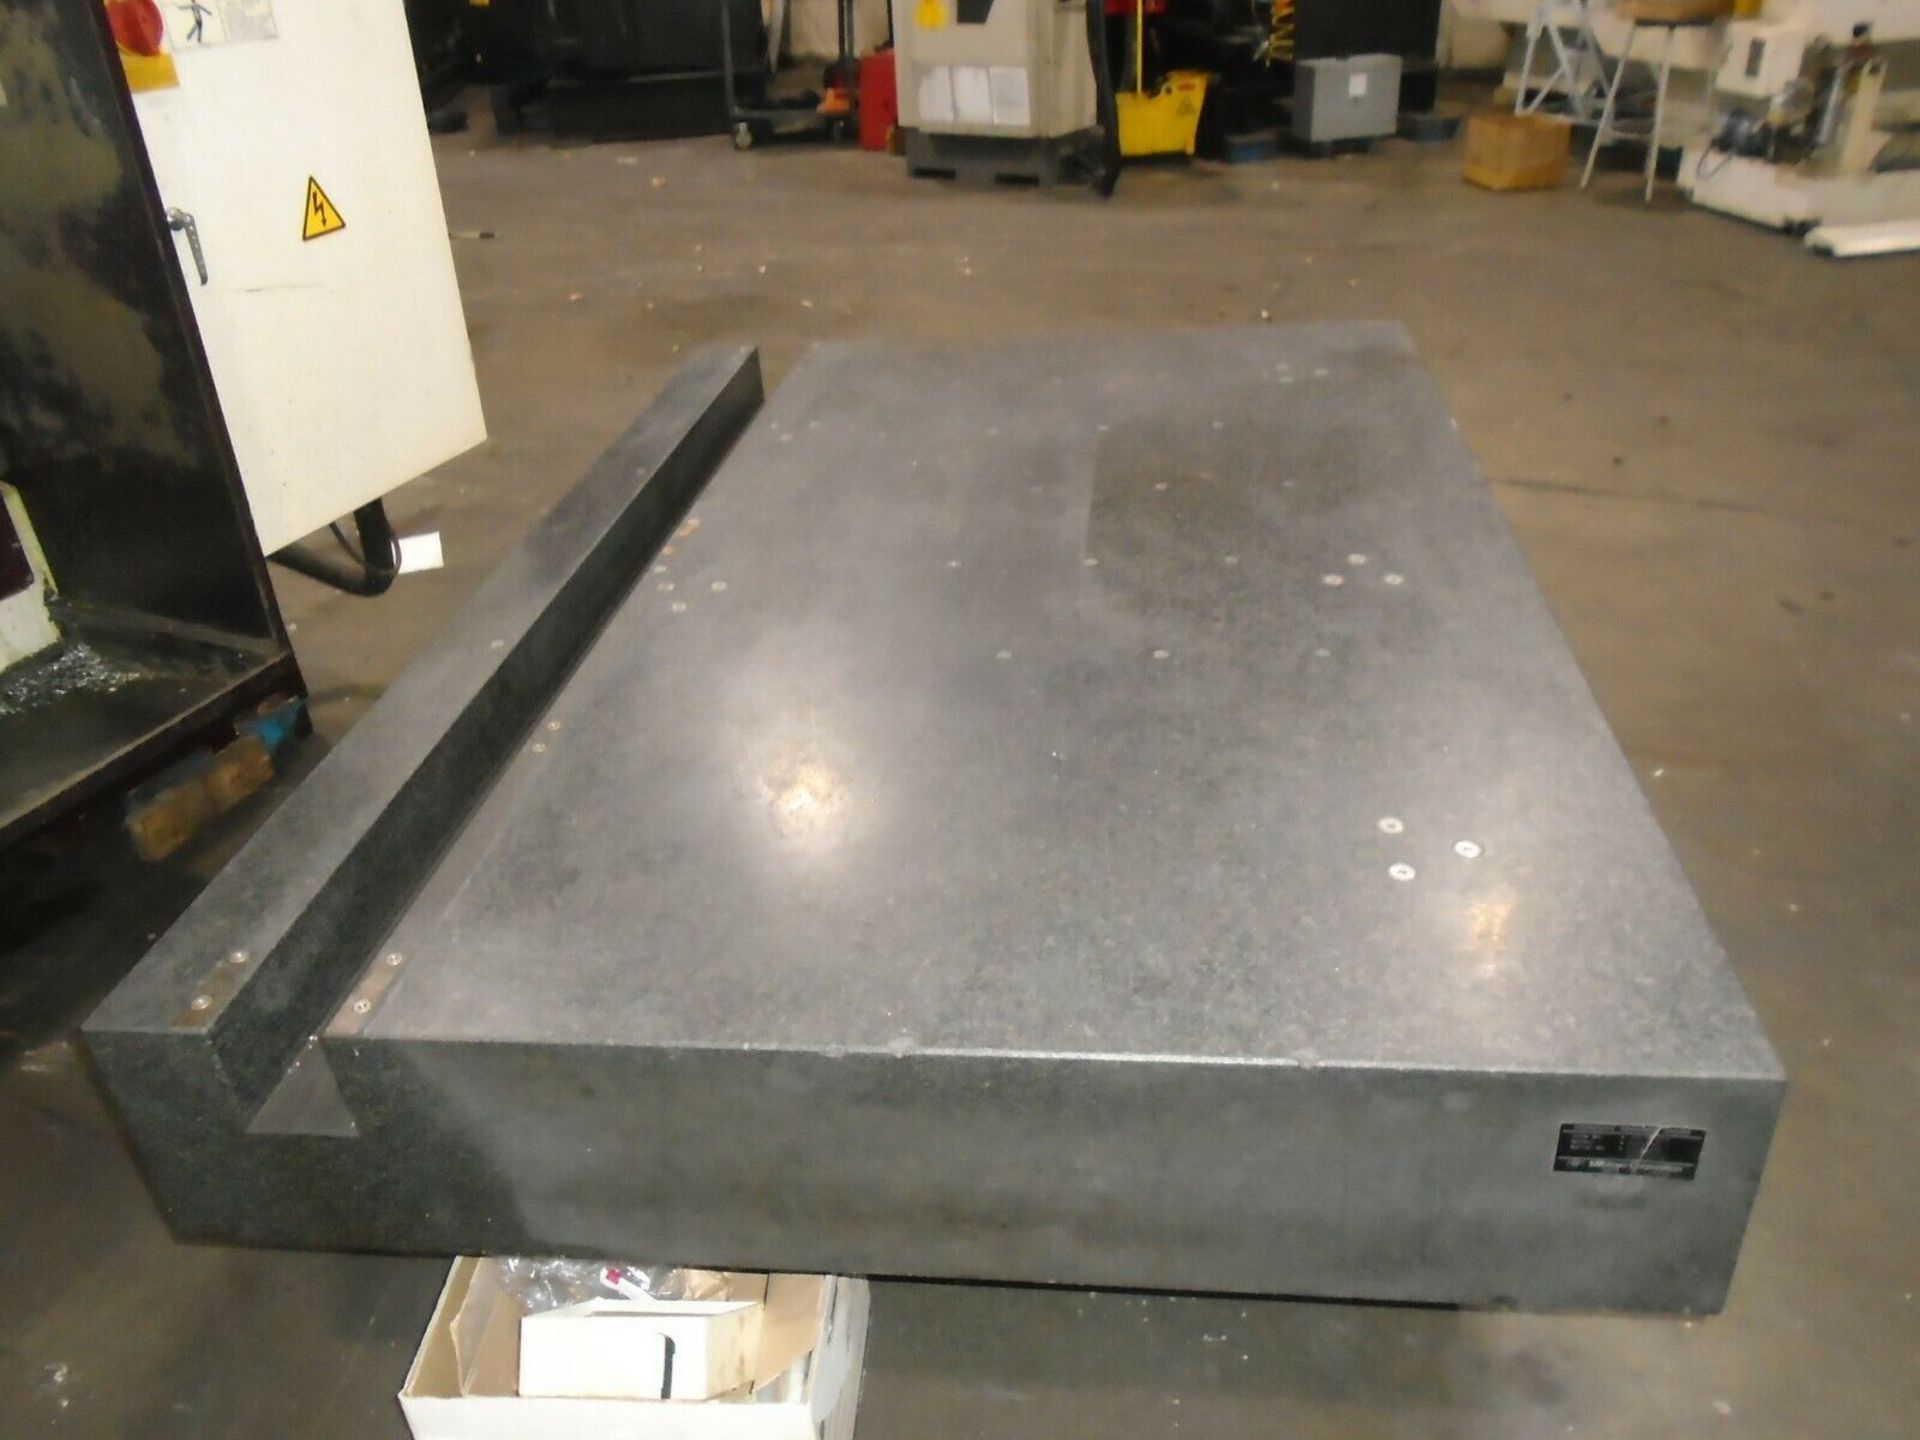 Mitutoyo CMM Granite Surface Plate 76” x 52” x 10” Thick Stock 12386 Loading fee $350